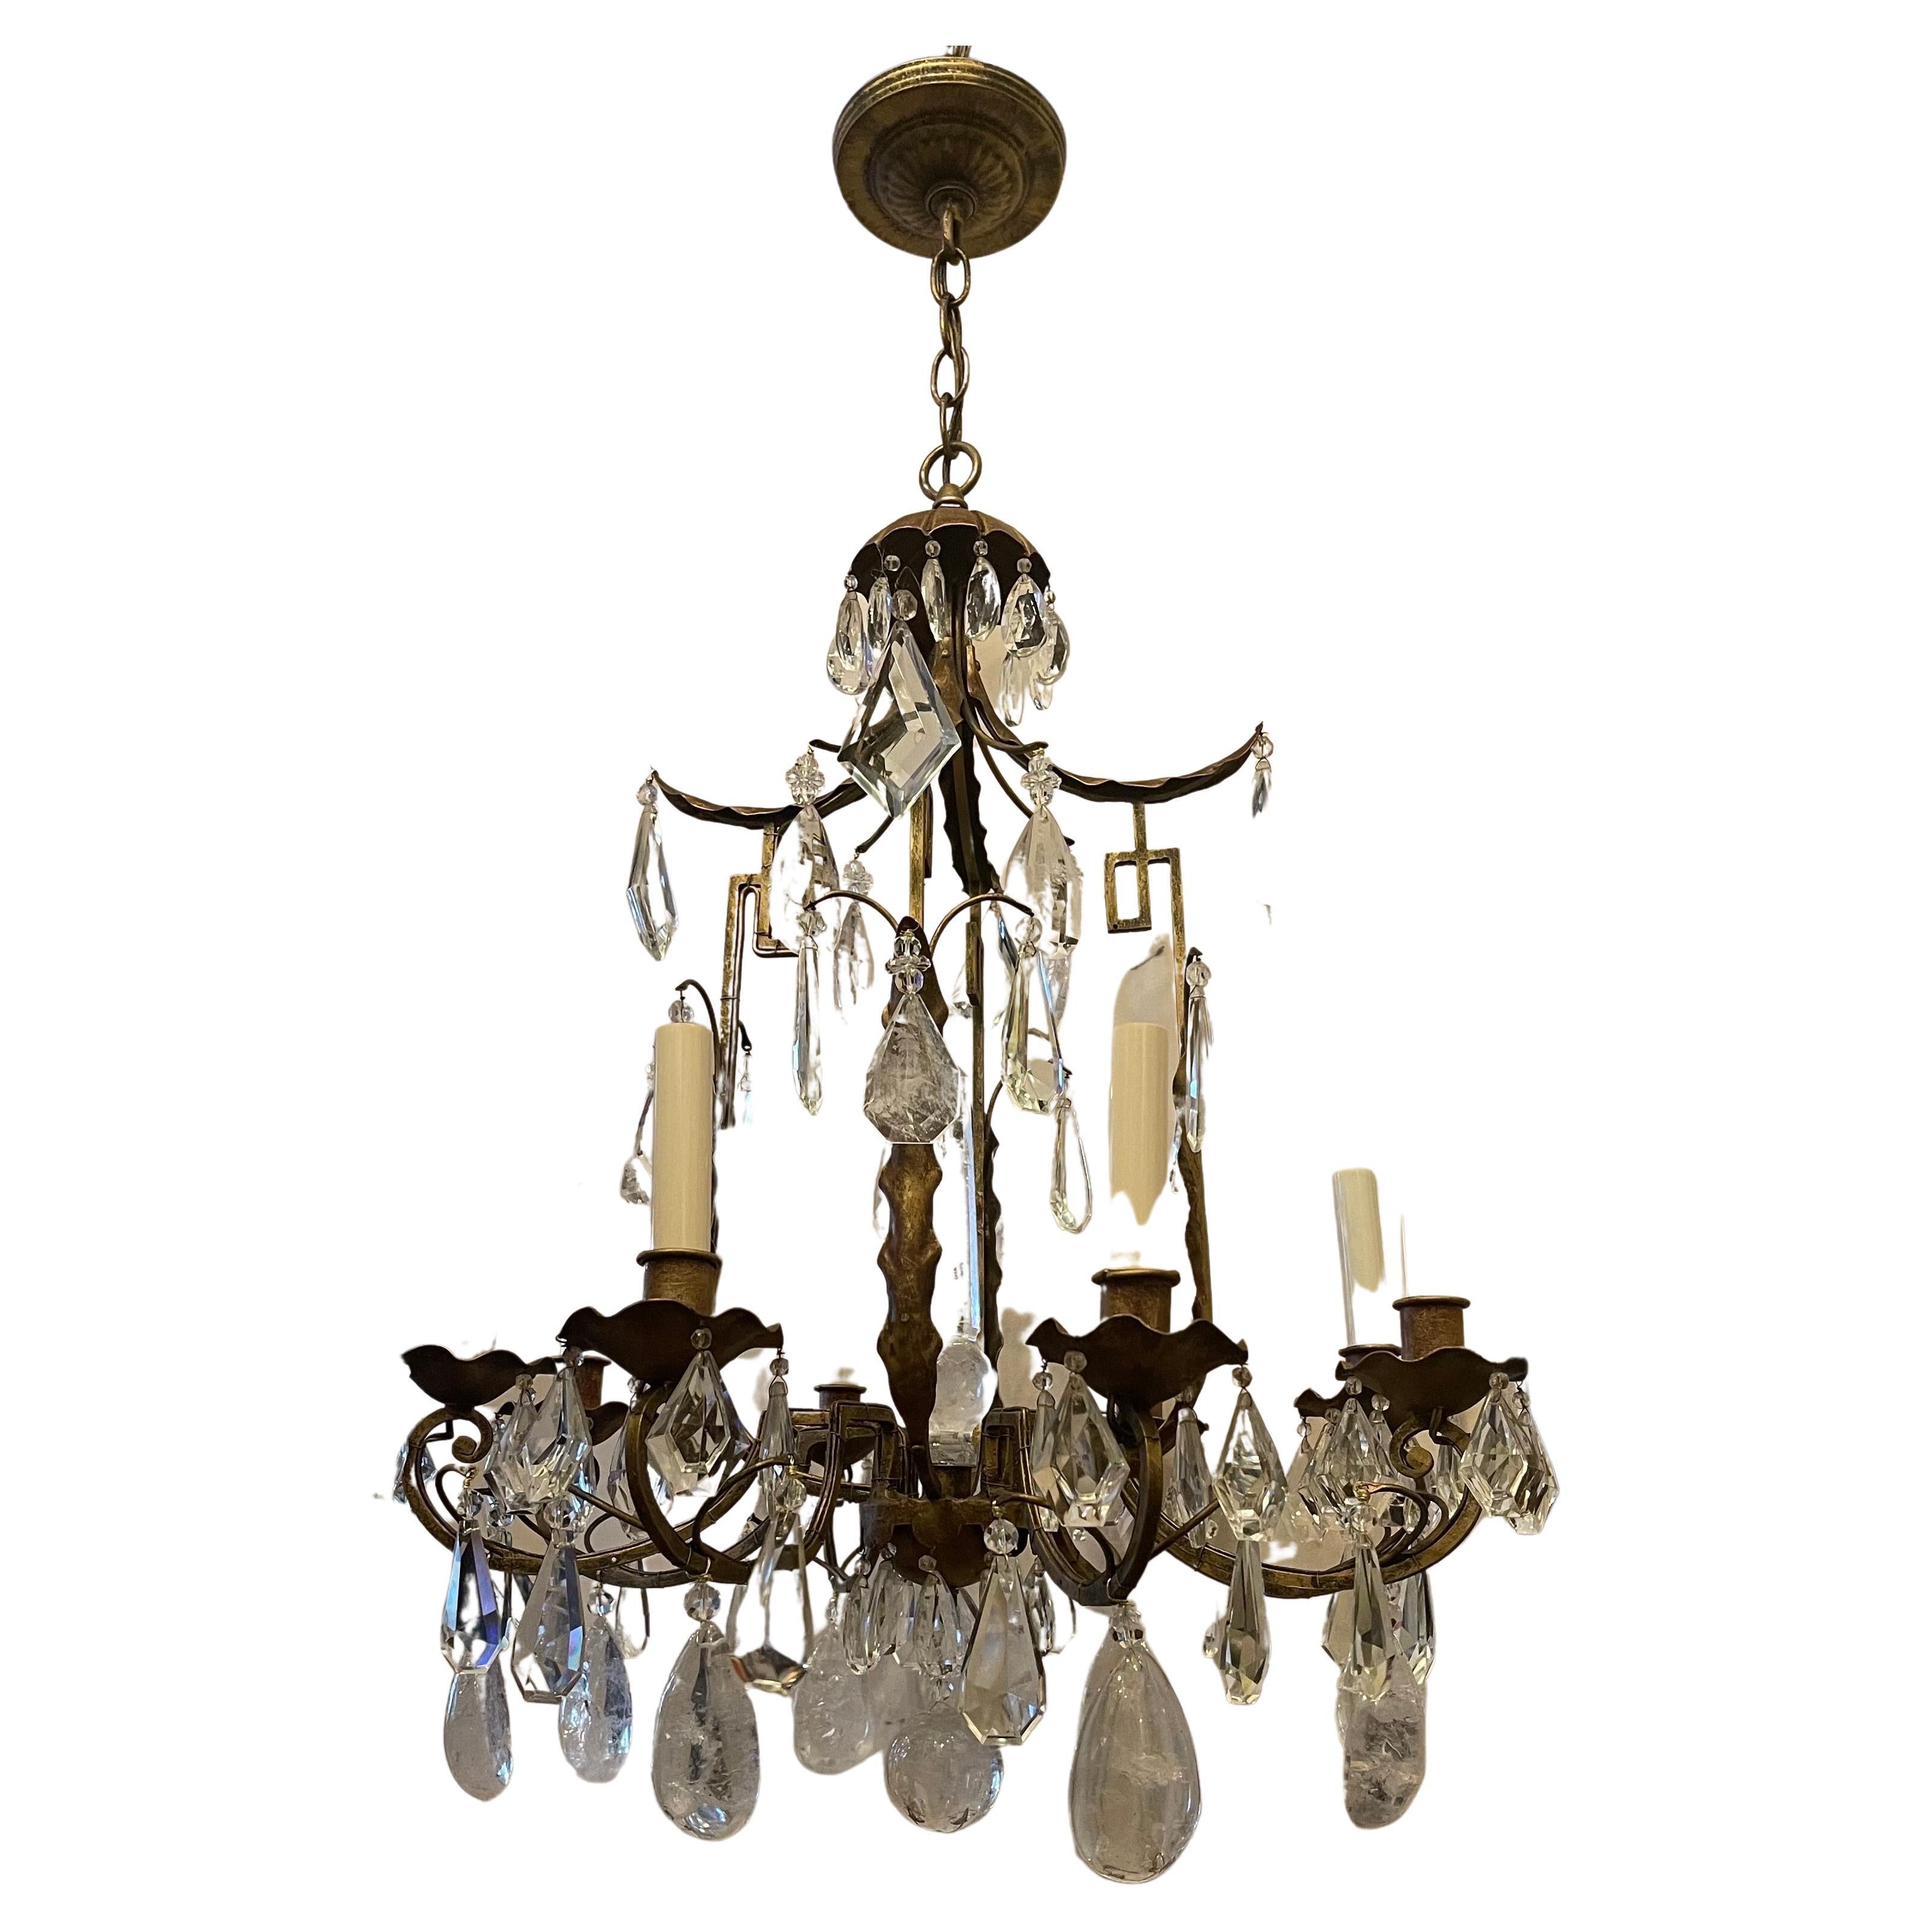 A wonderful French Pagoda form gold gilt with rock crystal & faceted crystal pendents in the manner of Maison Baguès chandelier having 8 candelabra lights and finished with a rock crystal ball on the bottom & a very impressive rock crystal center